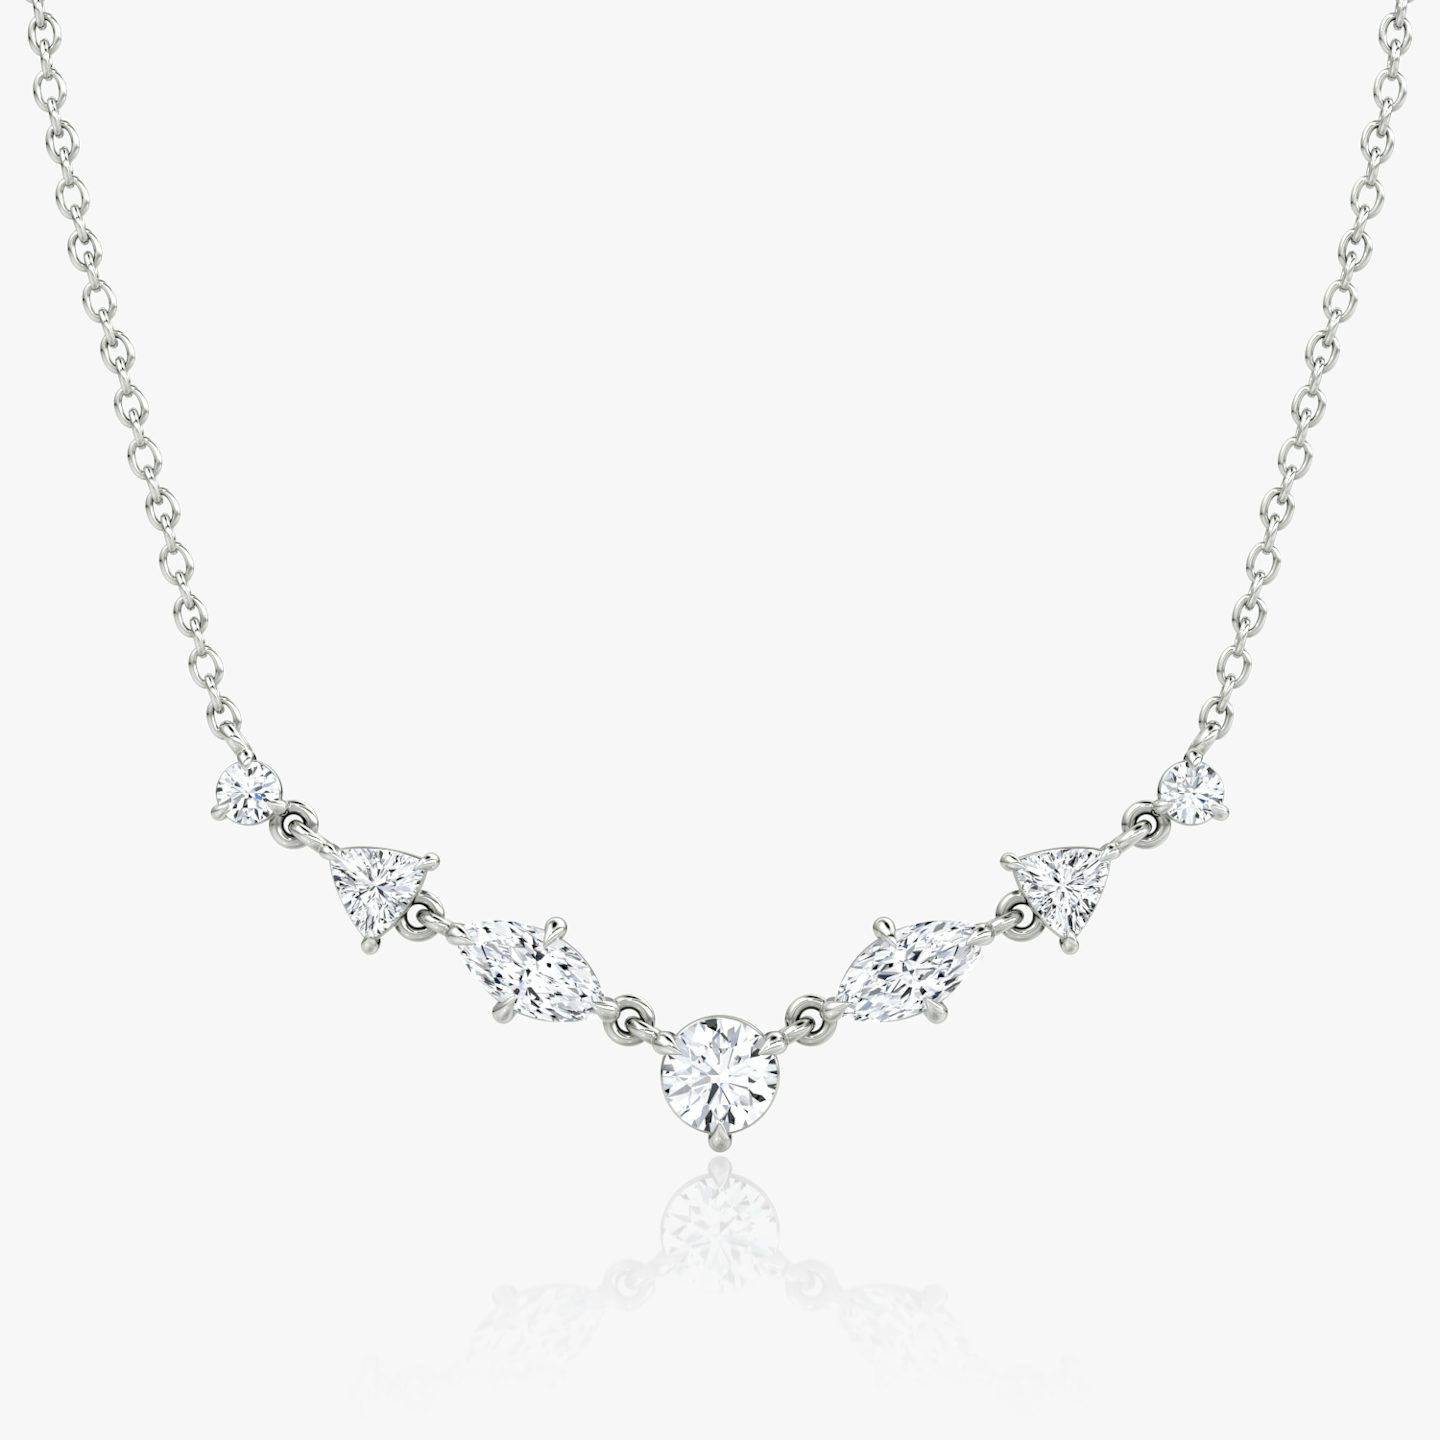 undefined | 14k | Or blanc | diamondtype: round-brilliant+marquise+trillion | chainLength: 16-18